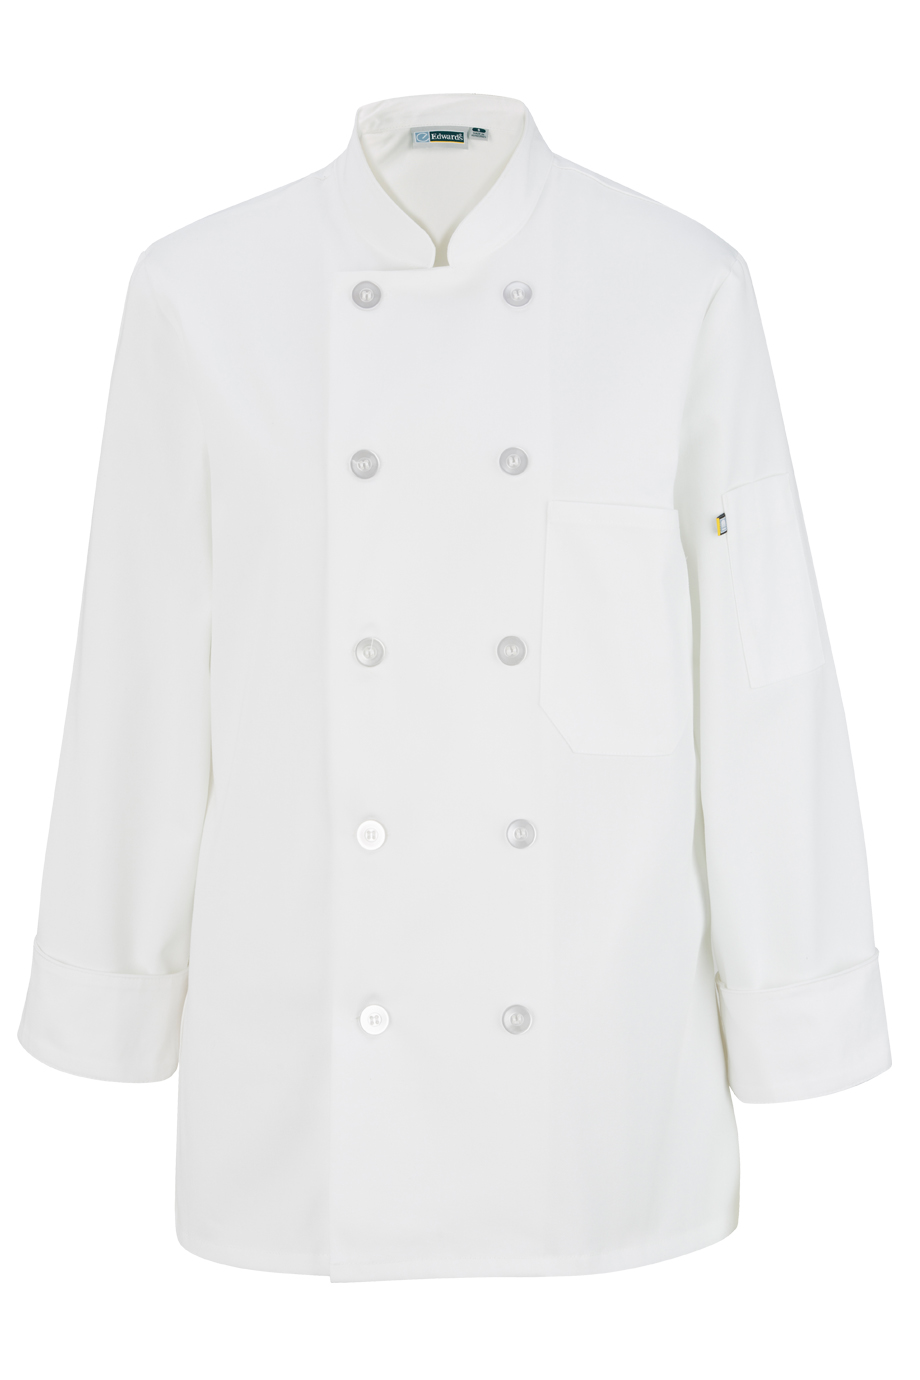 Ladies' 10 Button Long Sleeve Chef Coat 6301